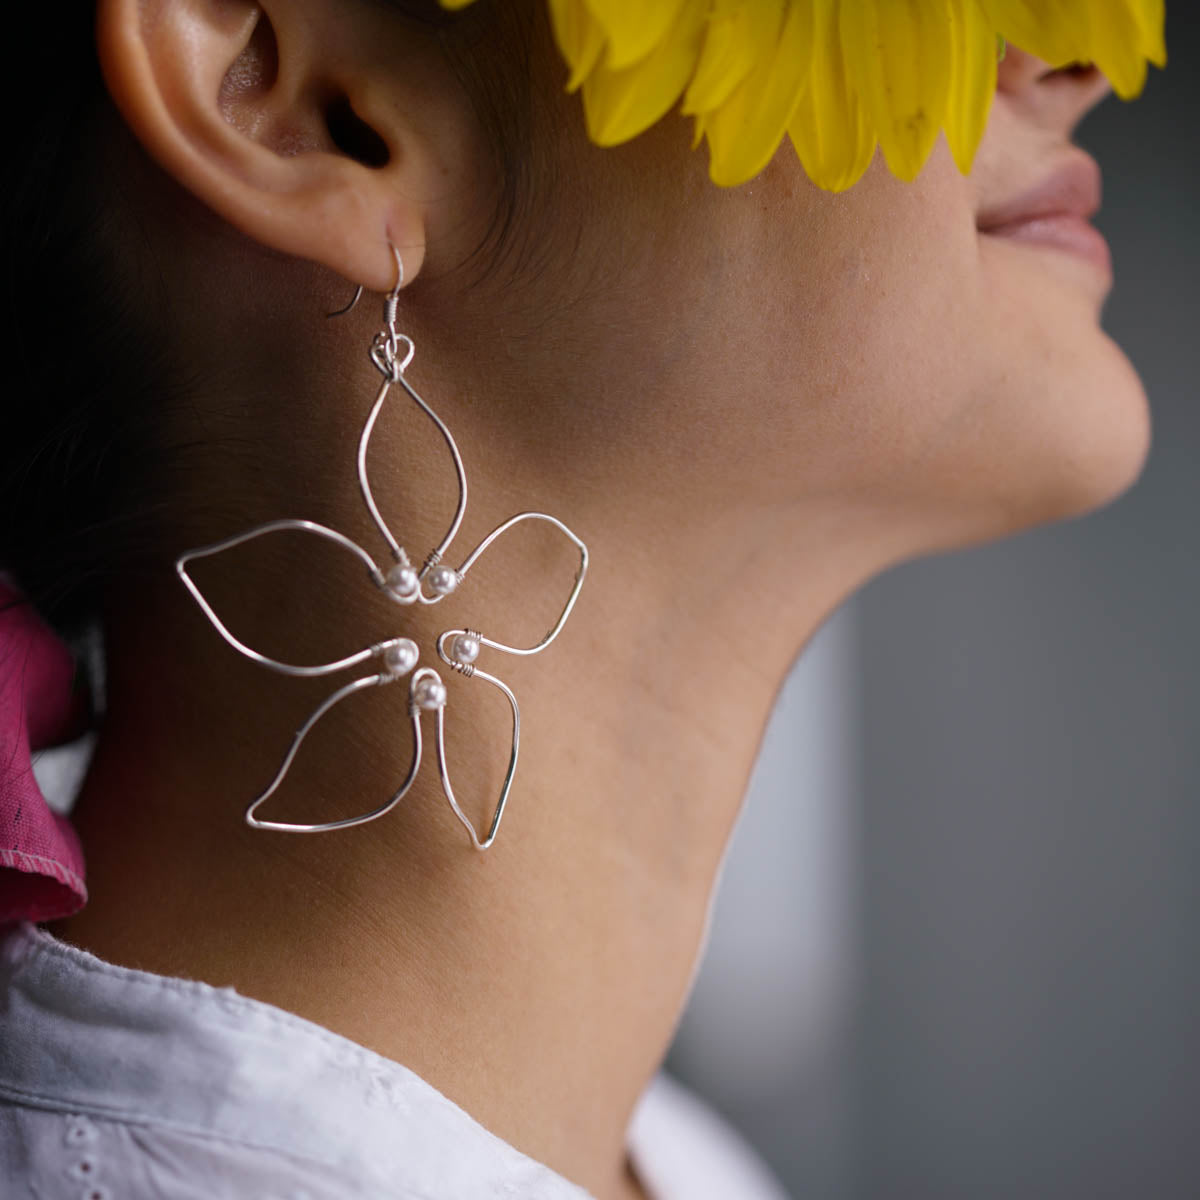 a close up of a person with a flower in their ear